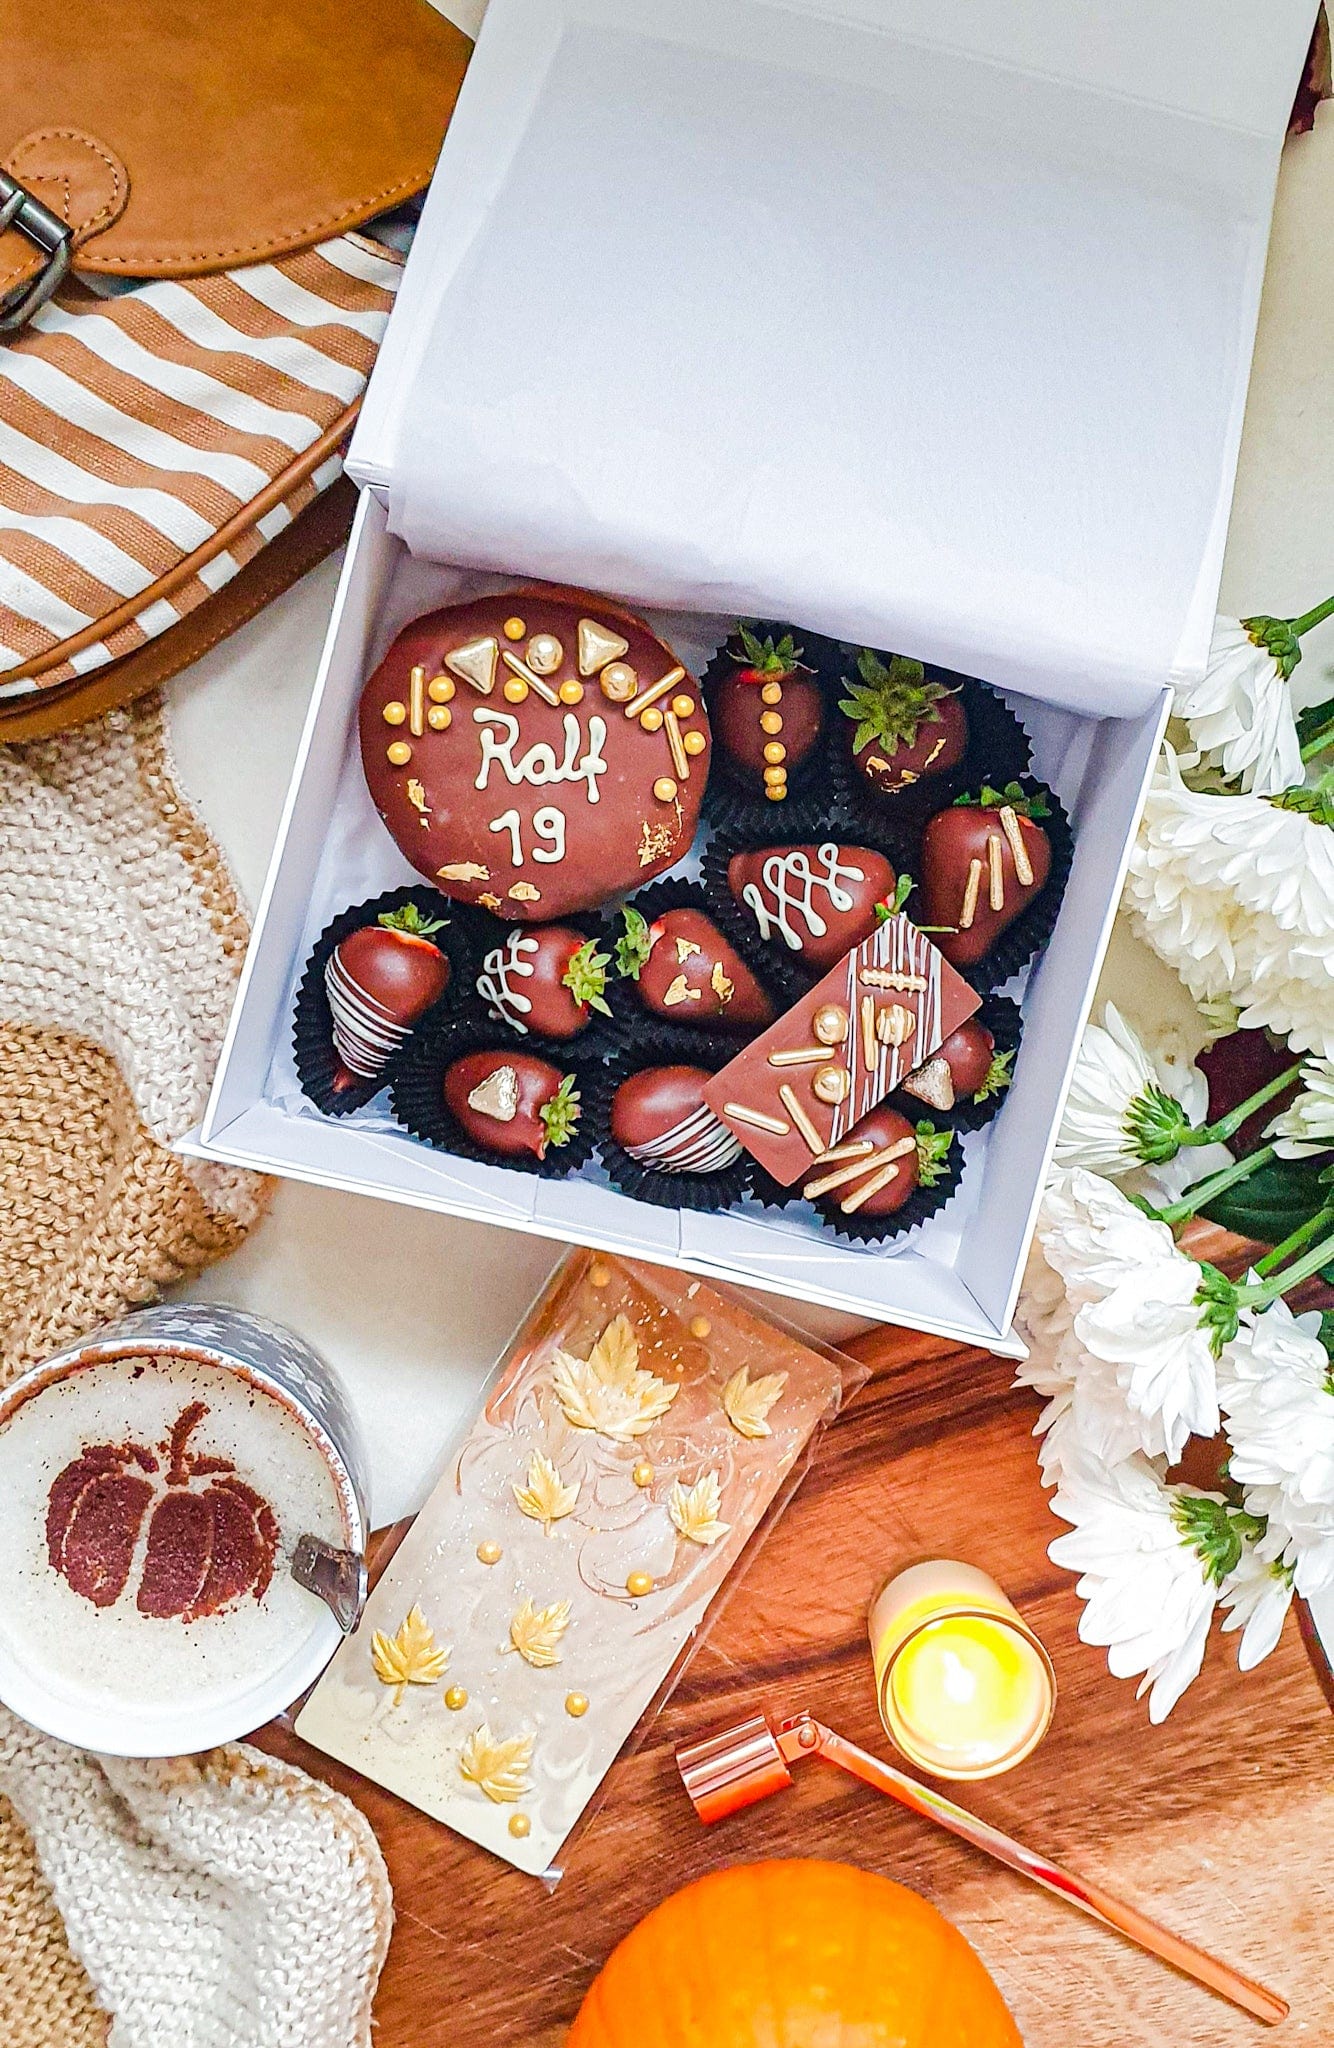 Chocolate-Covered Fruit and Donut Box - Sisi food sculptor